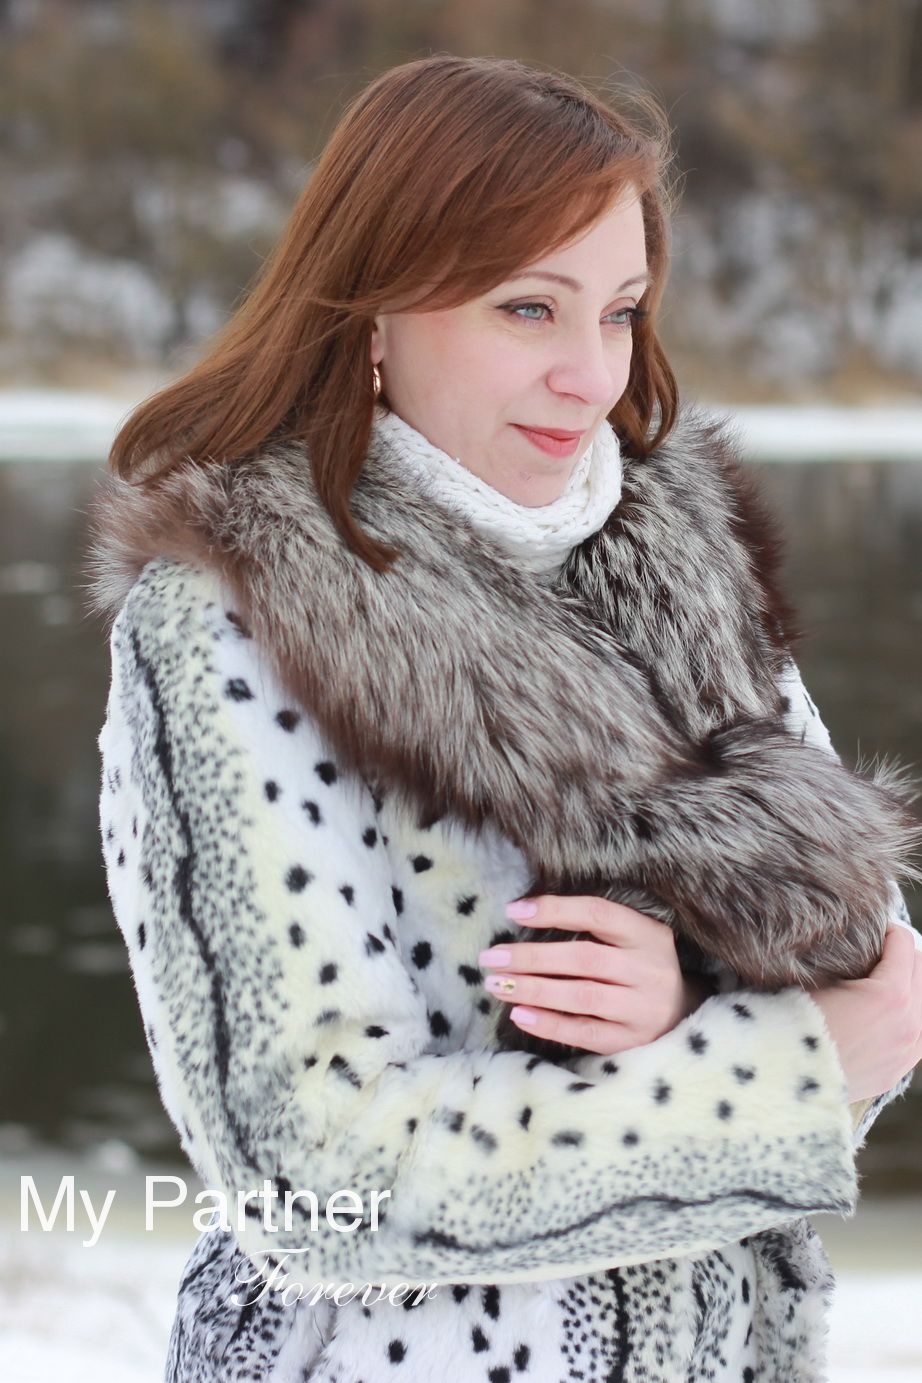 Matchmaking Service to Meet Alesya from Grodno, Belarus